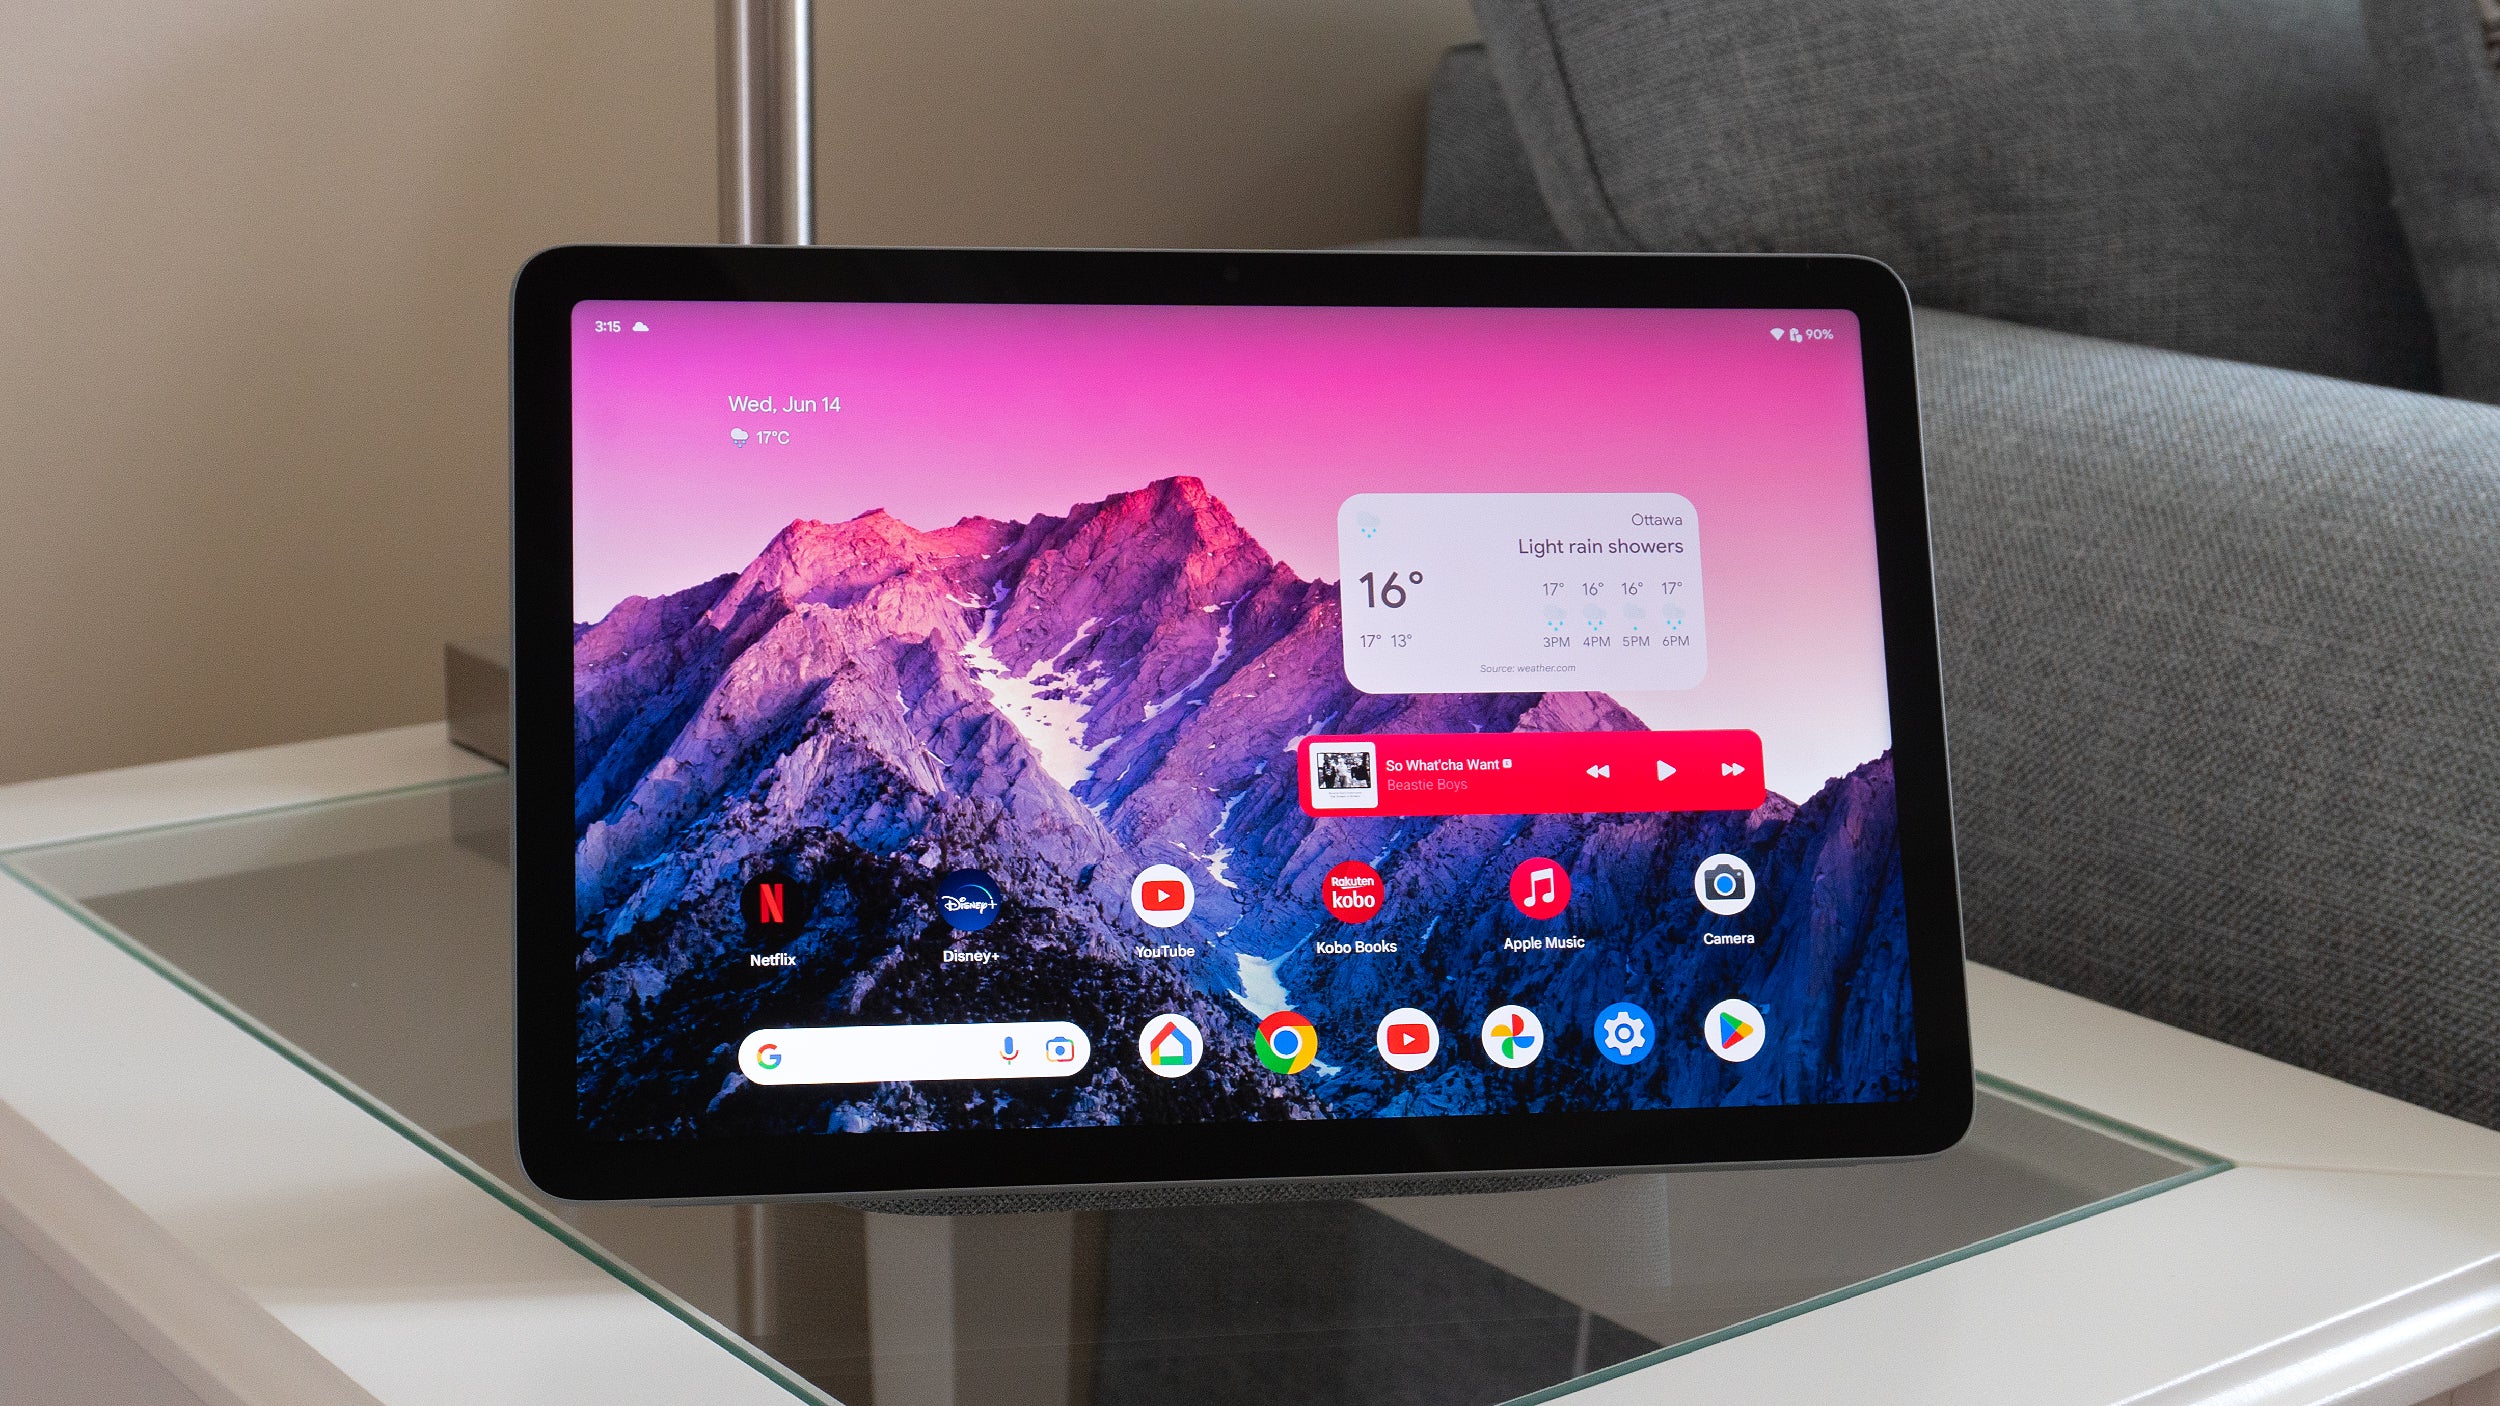 Android 13 feels more spacious on the Pixel Tablet's 10.95-inch screen, but it can quickly get cramped when using two apps side-by-side. (Photo: Andrew Liszewski | Gizmodo)